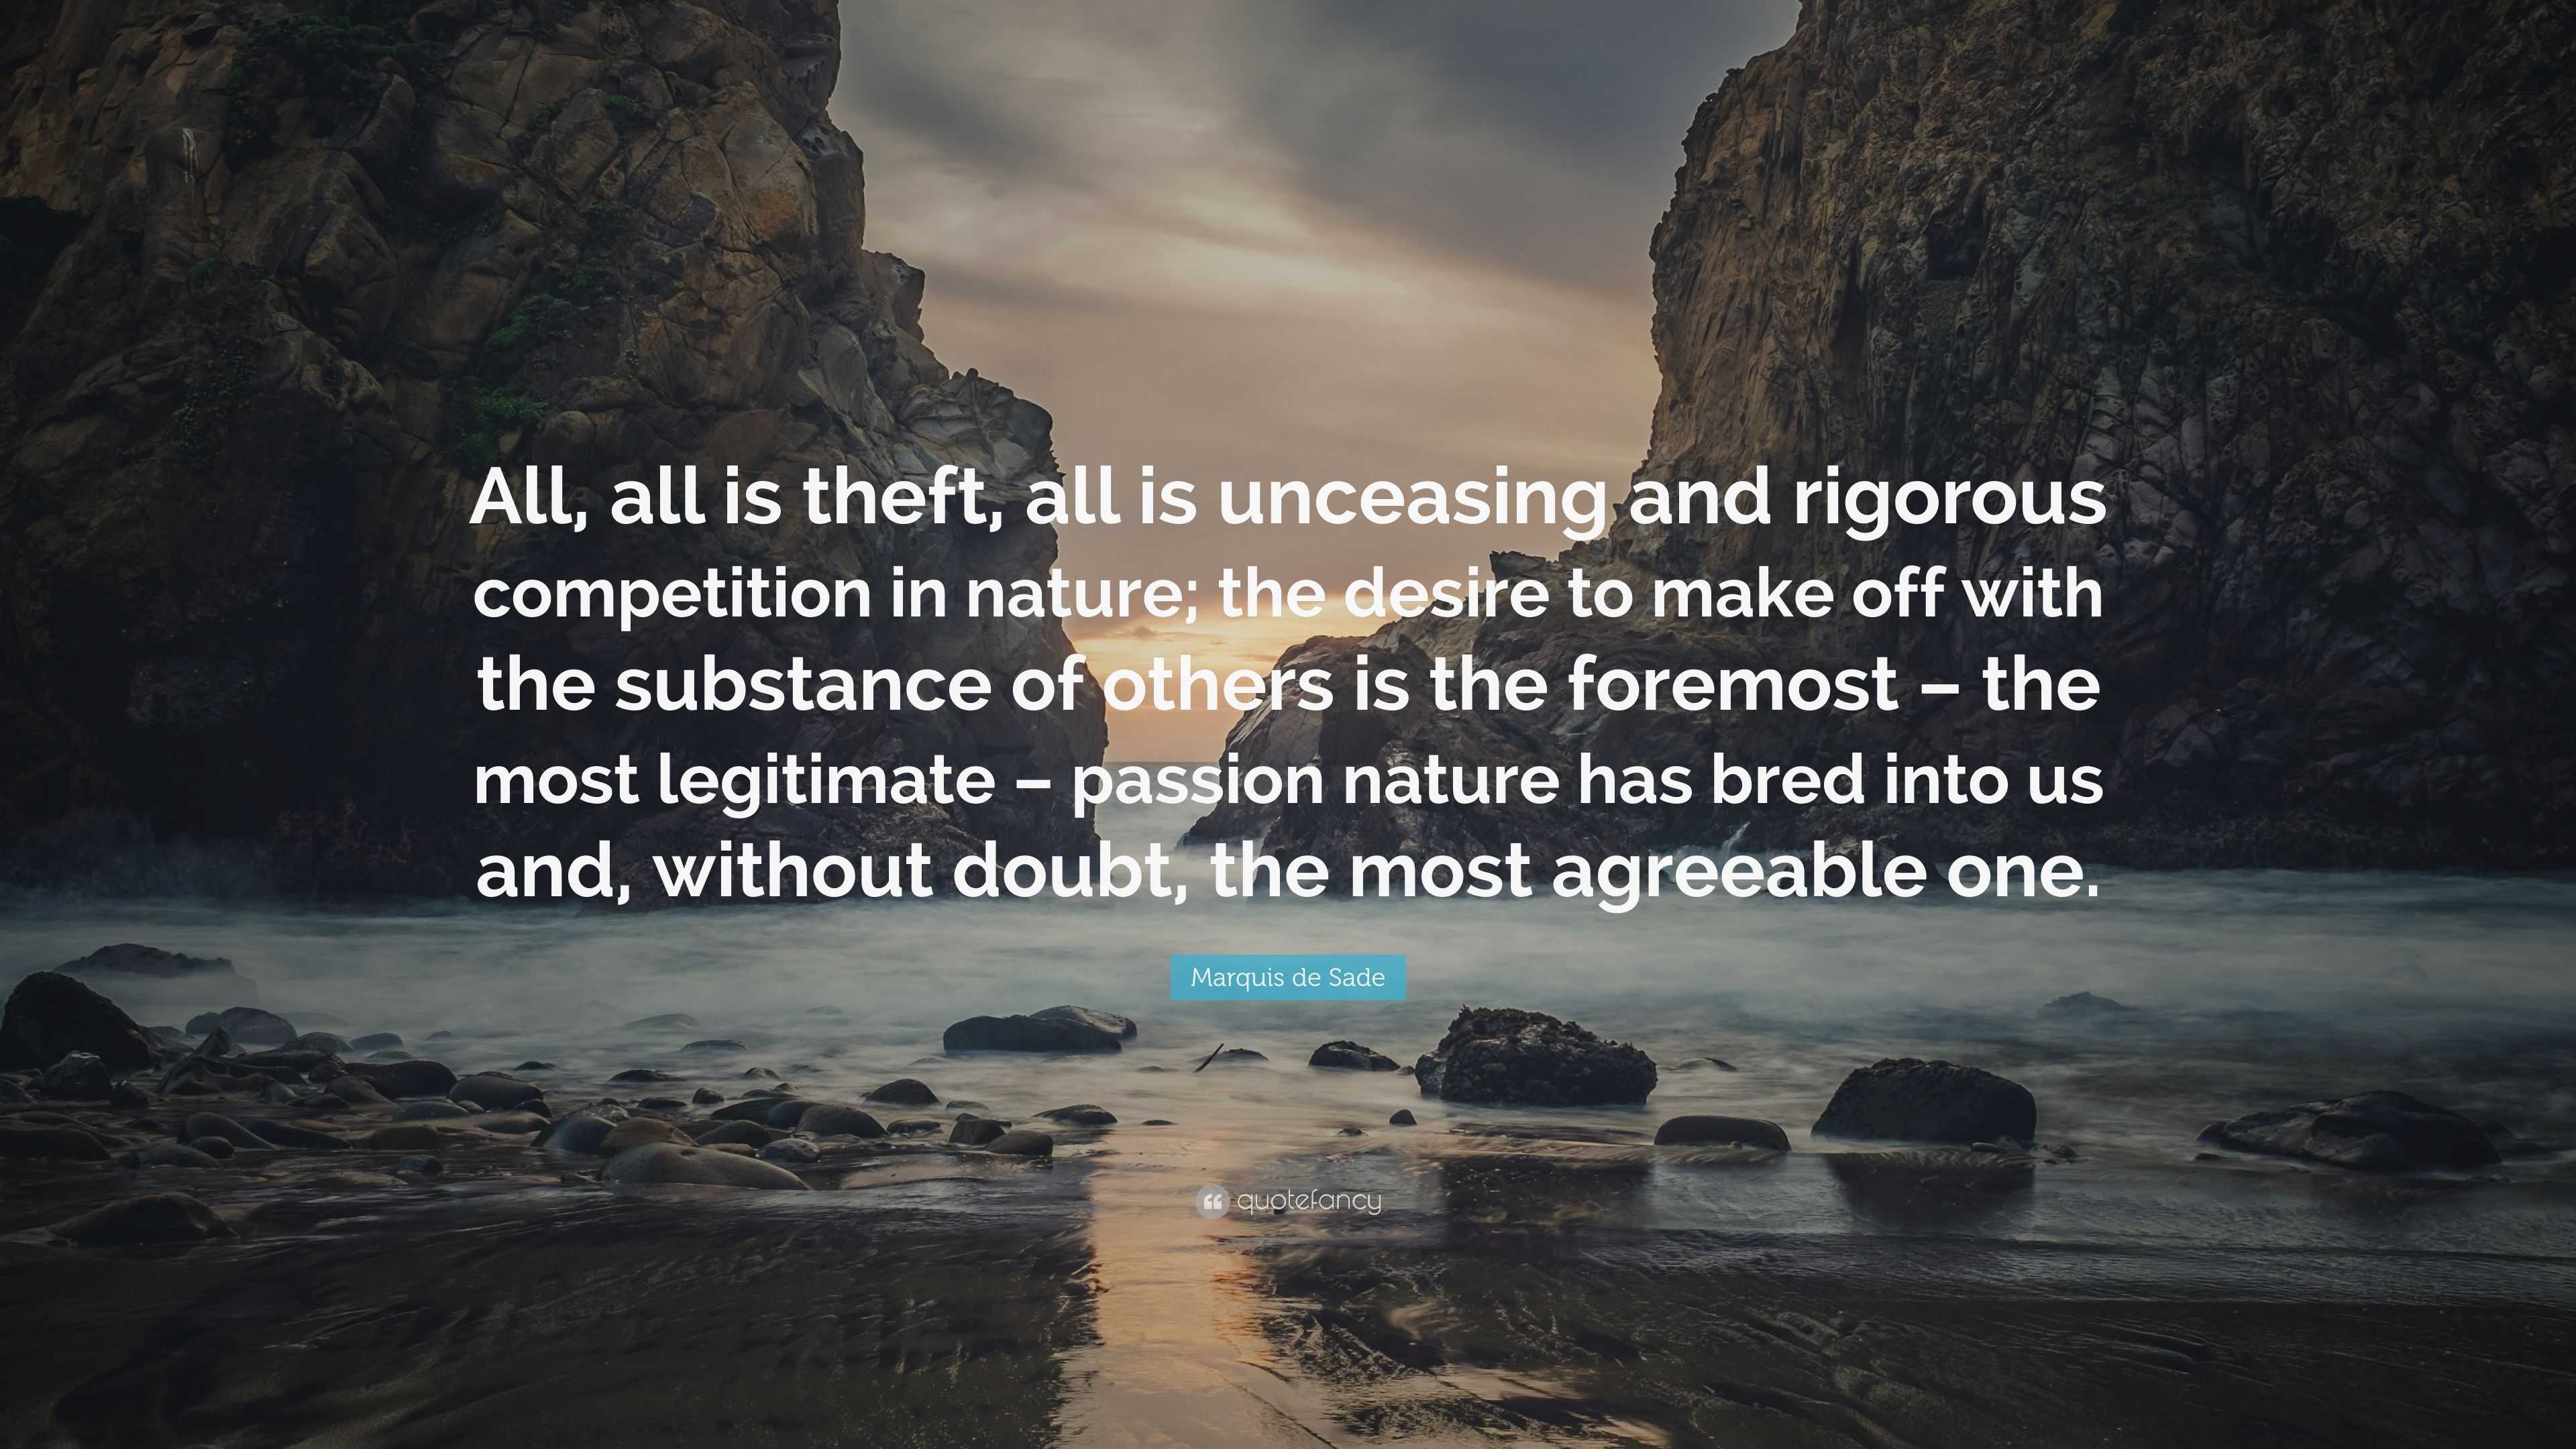 Marquis de Quote: “All, all is theft, all is unceasing and rigorous competition in nature; the desire to make off with the substance of oth...”